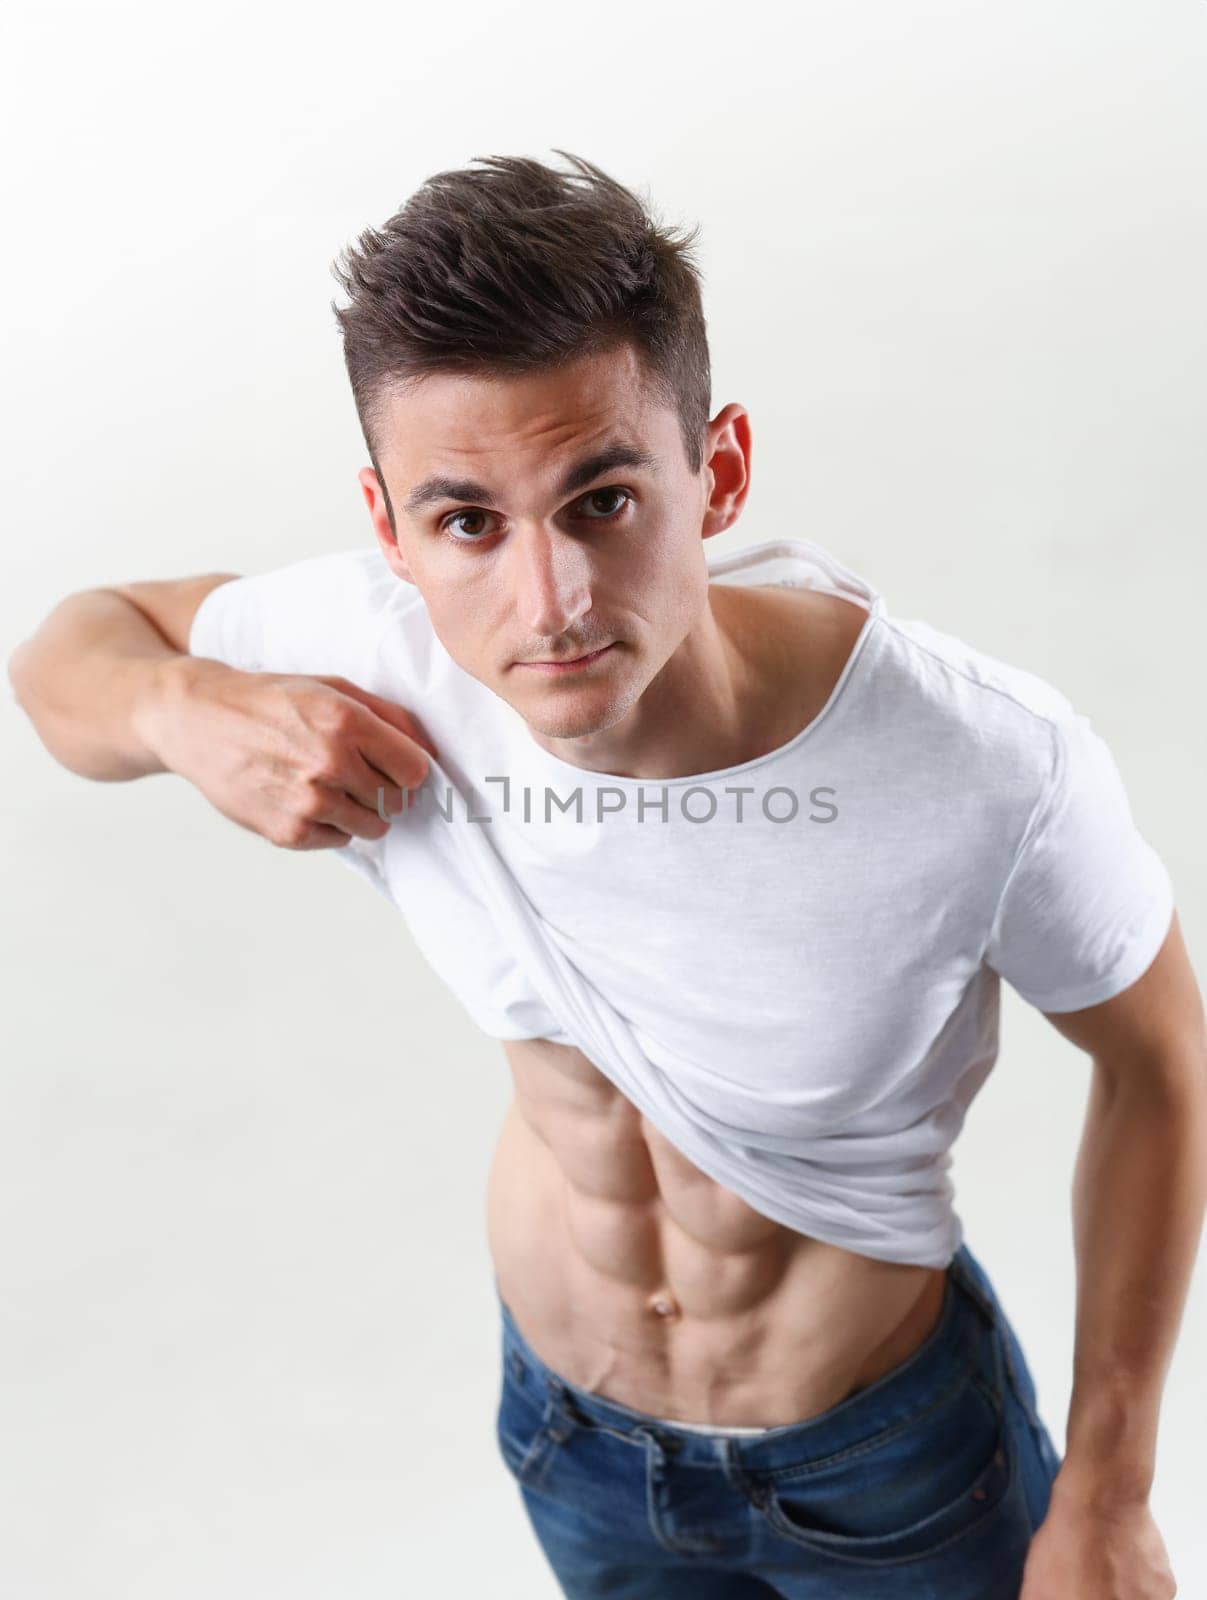 Strong male press thanks to diet and constant training